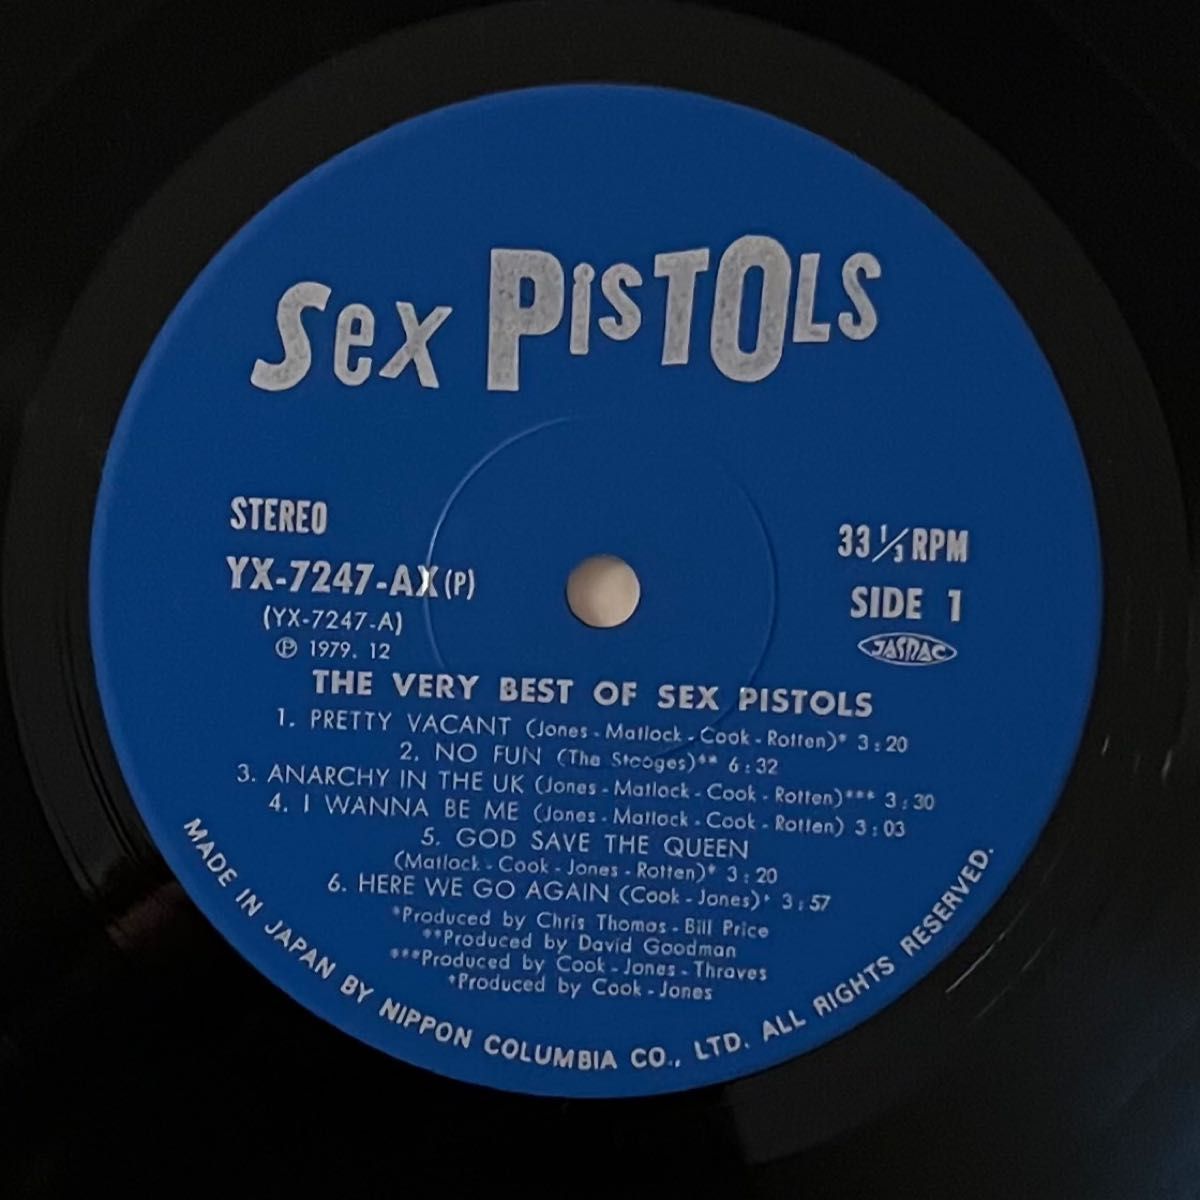 THE VERY BEST OF SEX PISTOLS AND WE DON’T CARE